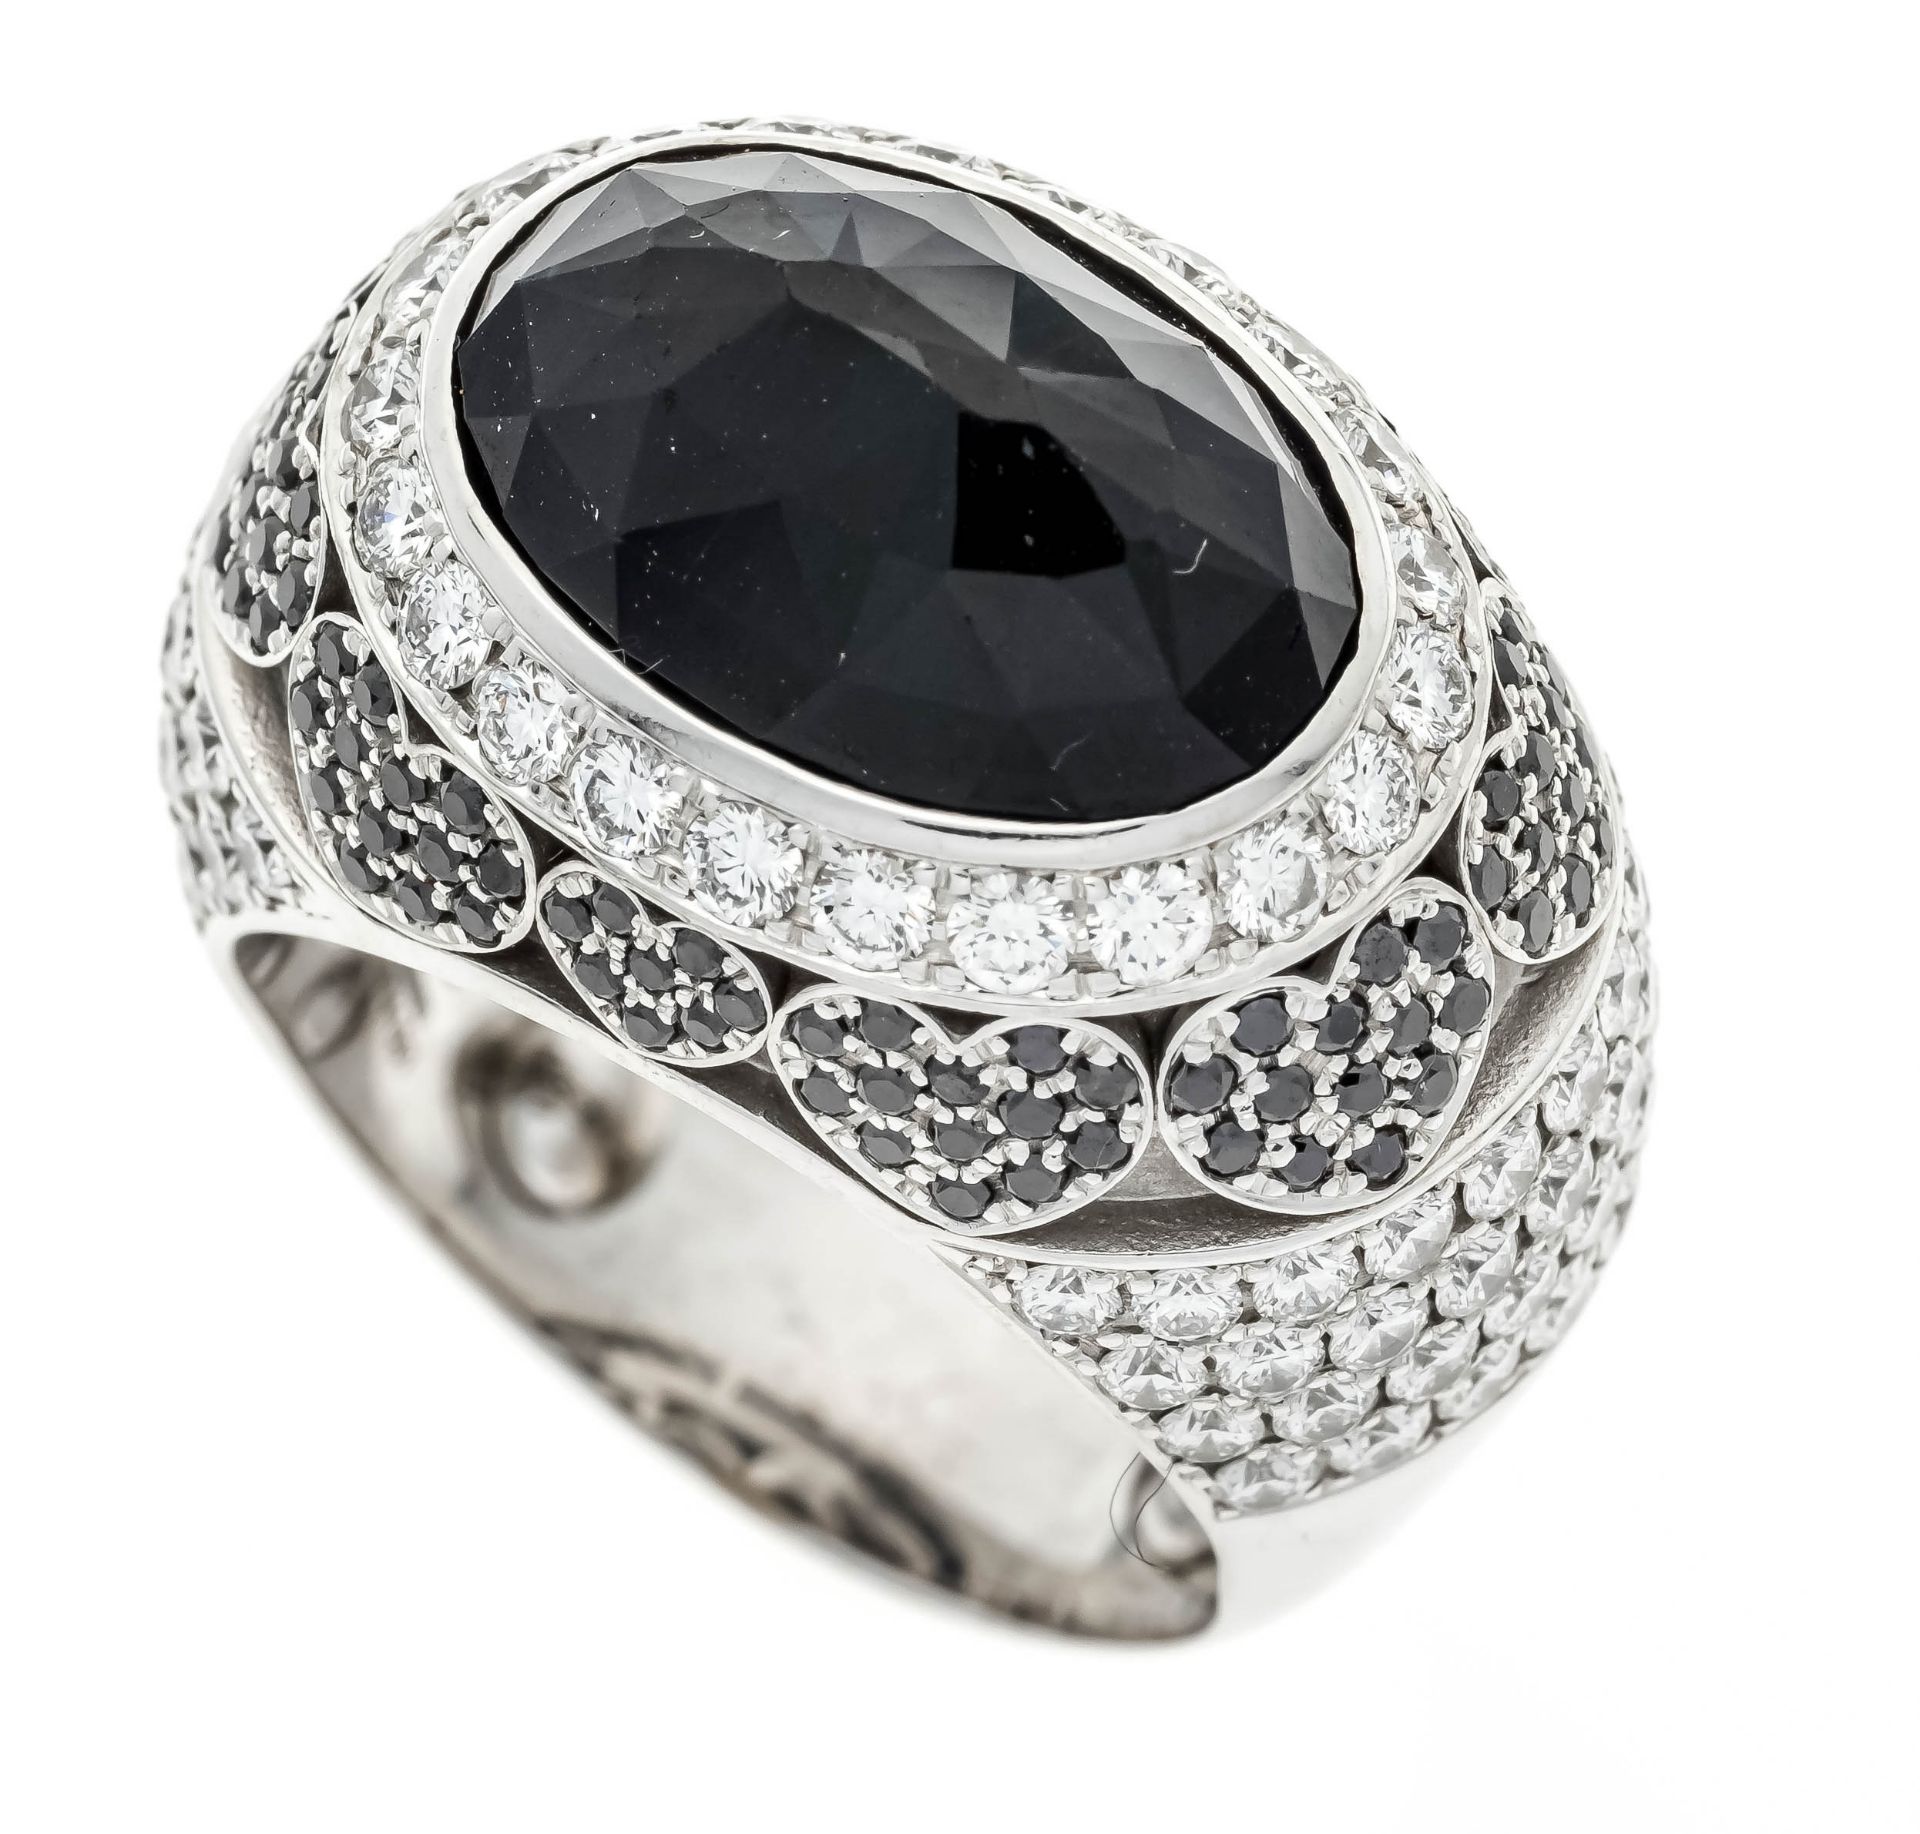 Chopard sapphire diamond ring WG 750/000 with a natural oval faceted sapphire 11.50 ct in a very